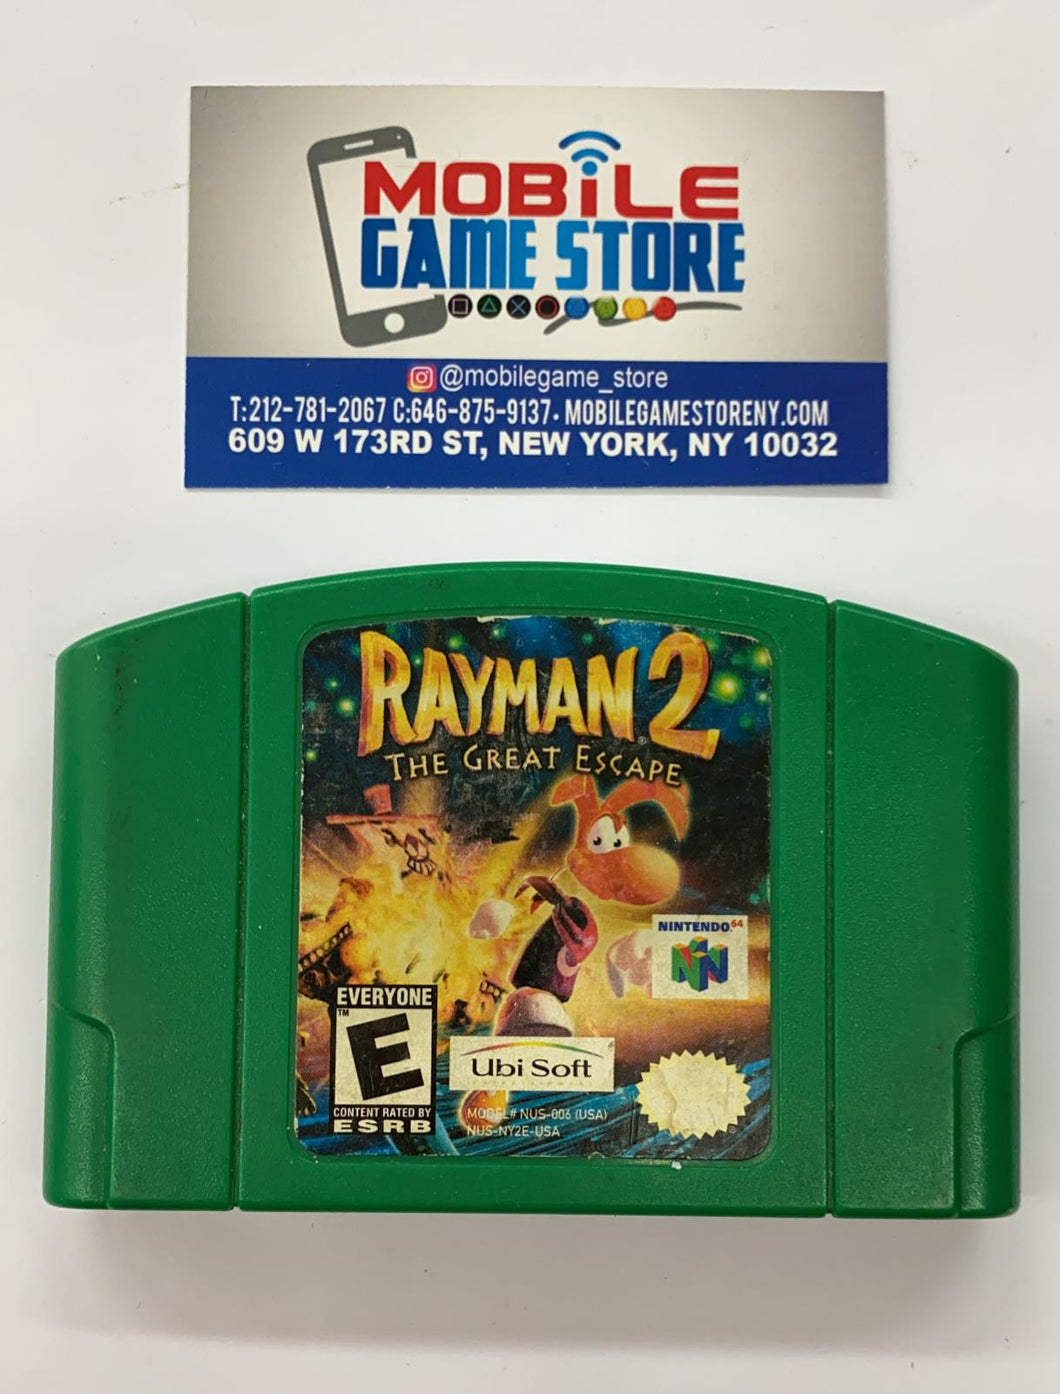 Rayman 2 the great escape (pre-owned)